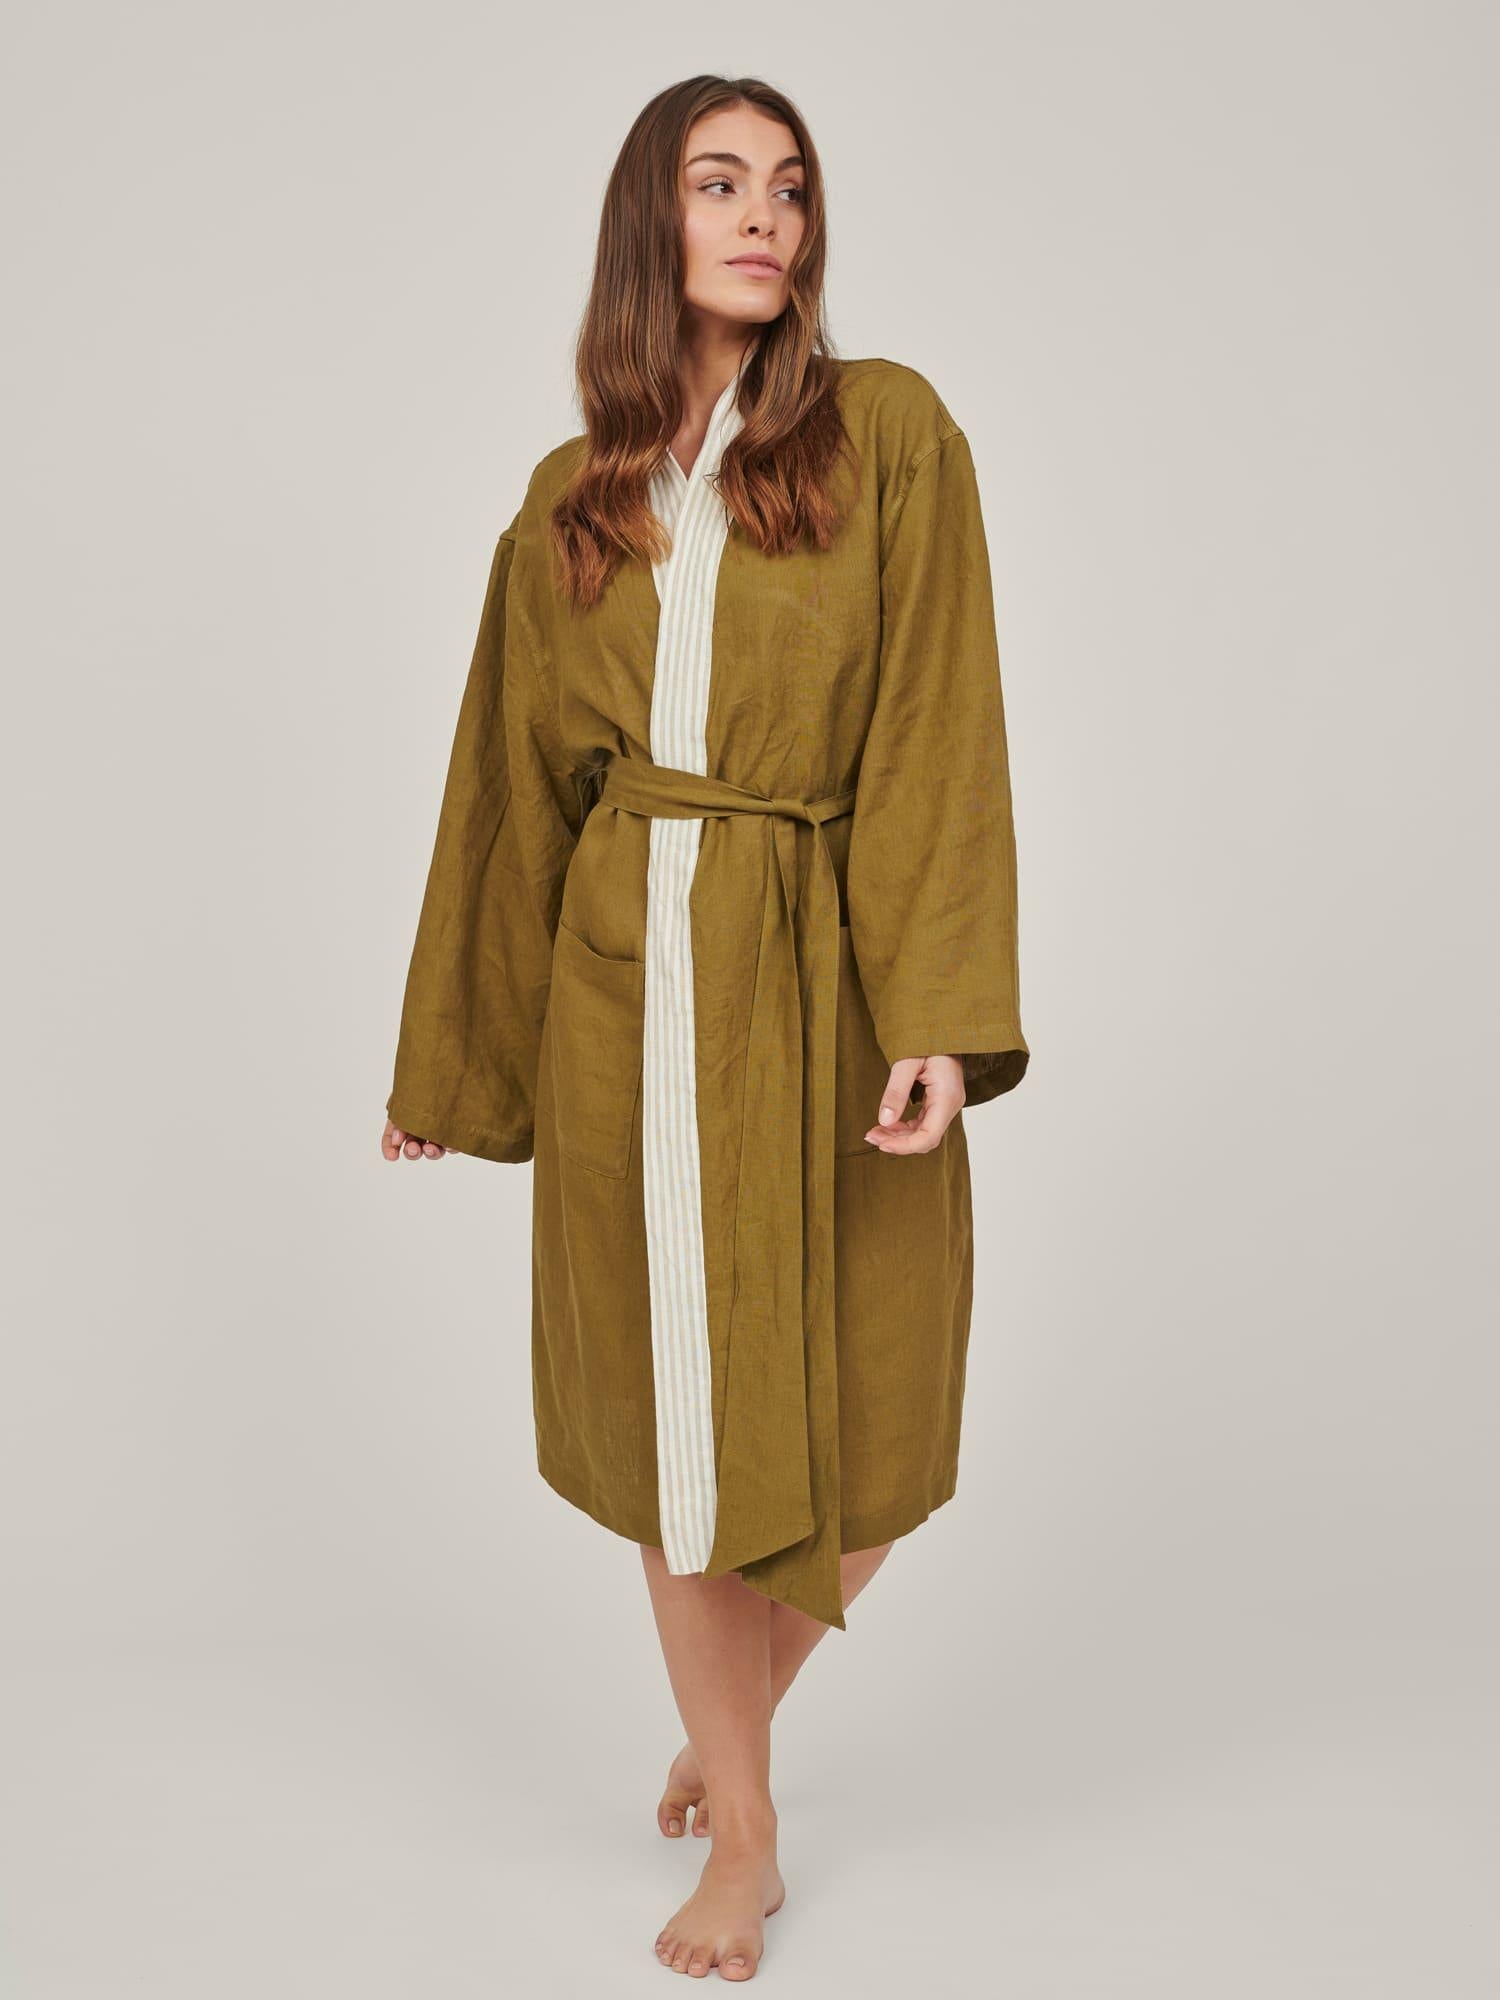 Embroidered Linen Robe in Olive